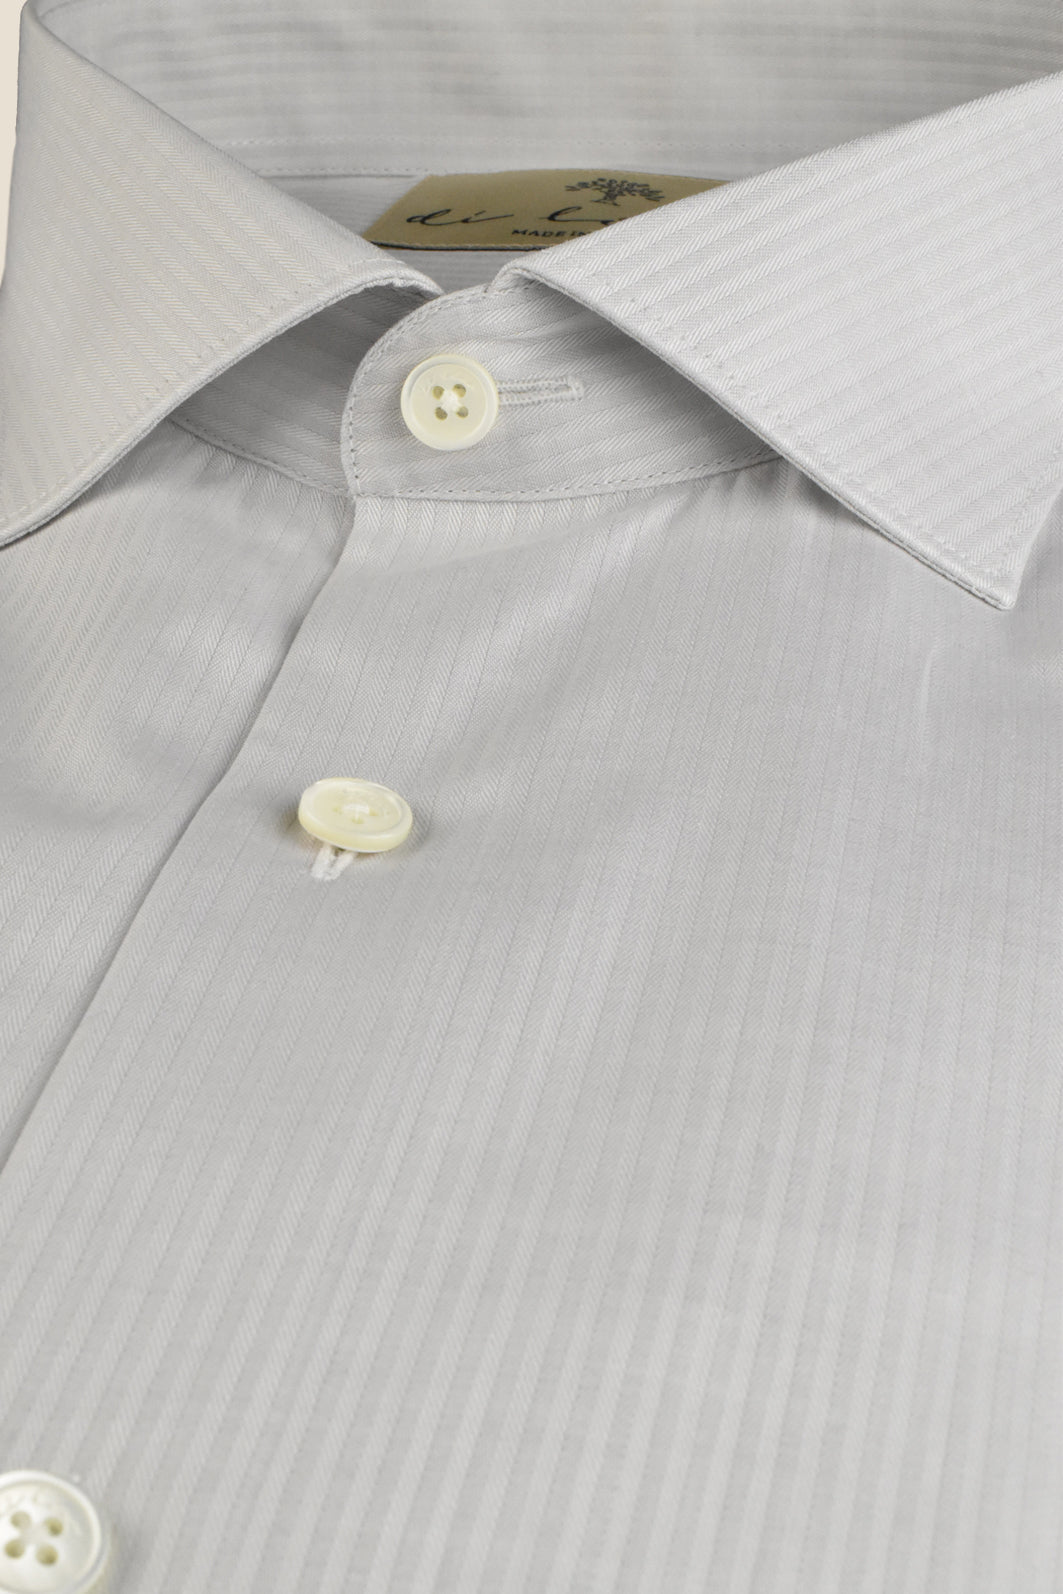 Beige shirt made of organic cotton with a classic shark collar and casual cut - Made to order